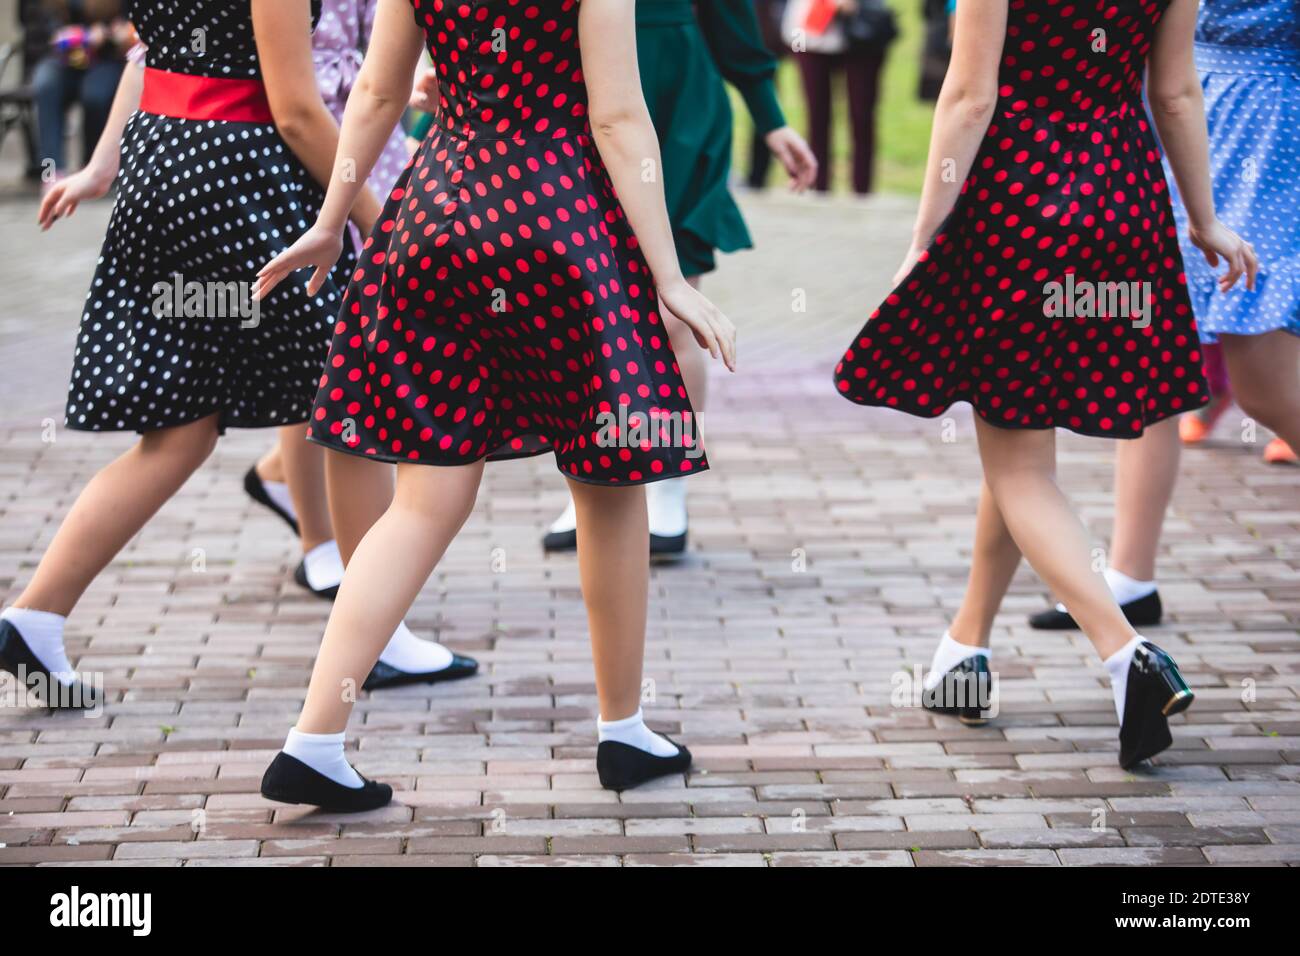 Young women wearing vintage polka dot dresses dancing in city park